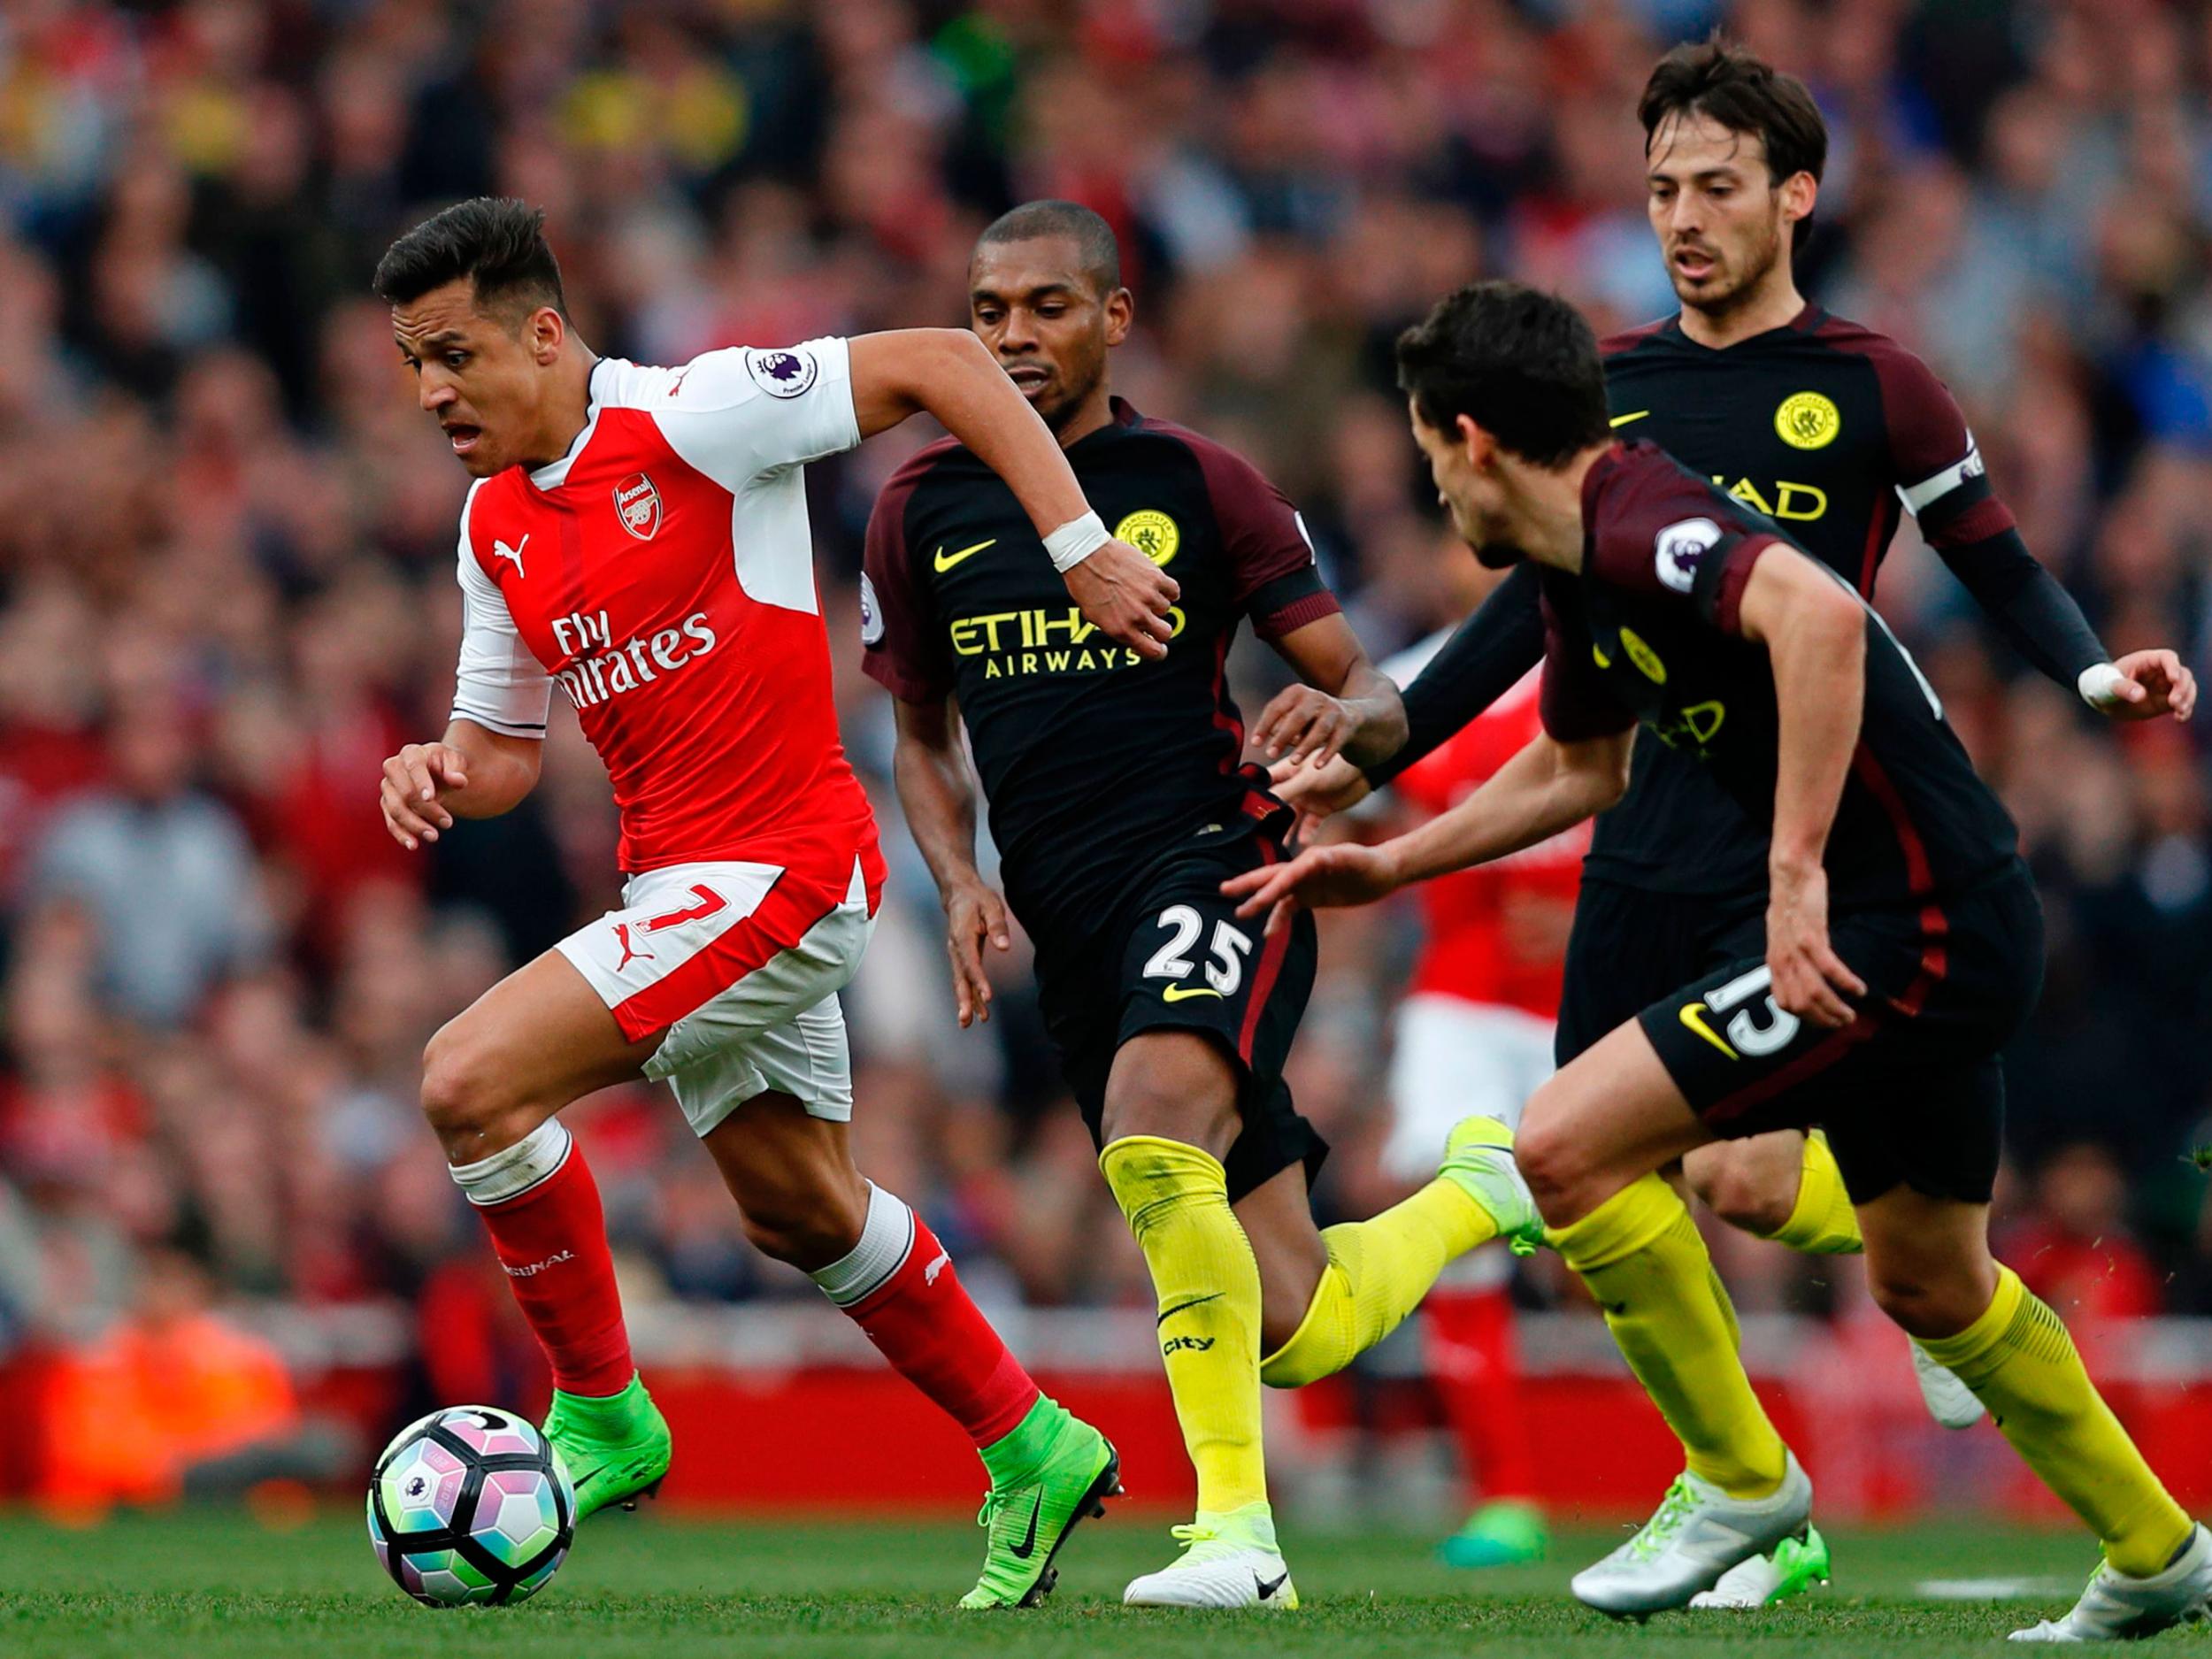 Alexis Sanchez carries the ball forward past Manchester City's midfield